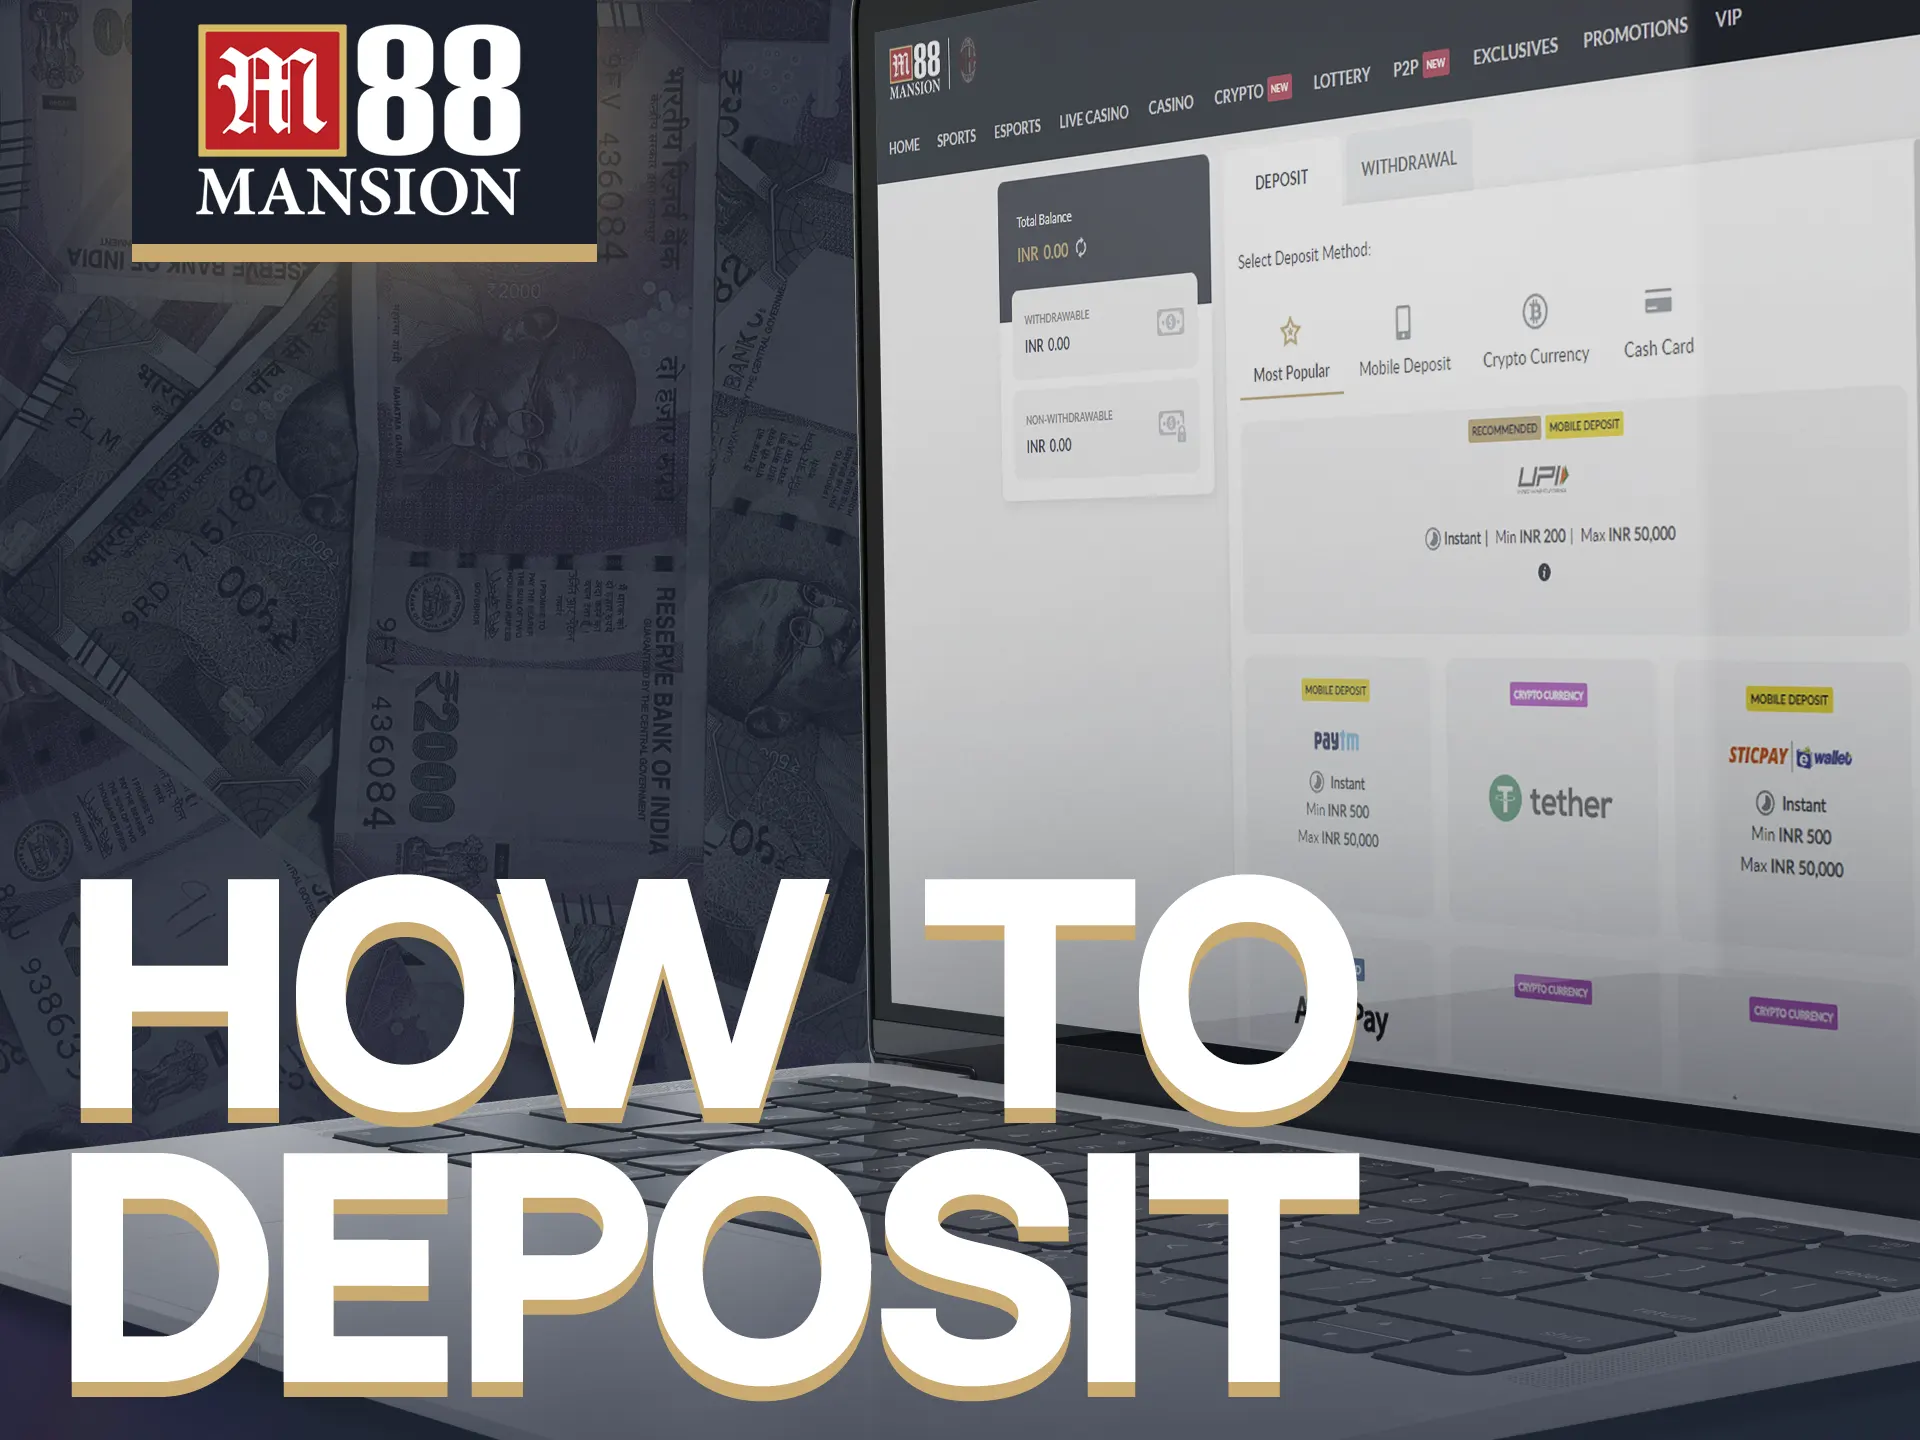 Deposit money on M88 for gaming access.